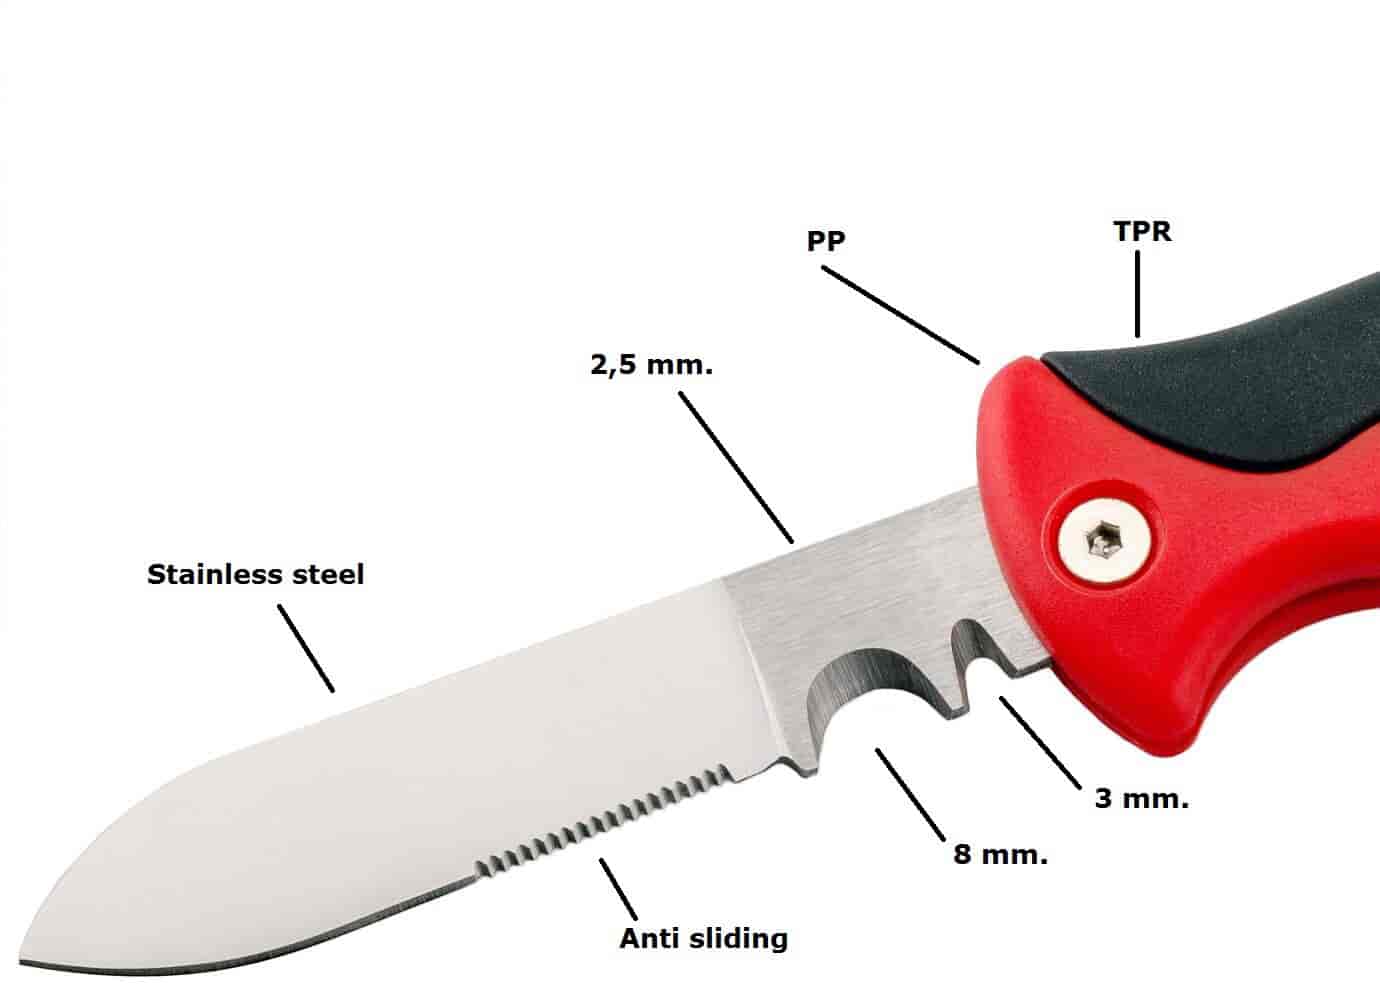 Cableknife - Electrician’s knife for quick and convenient cable and wire stripping